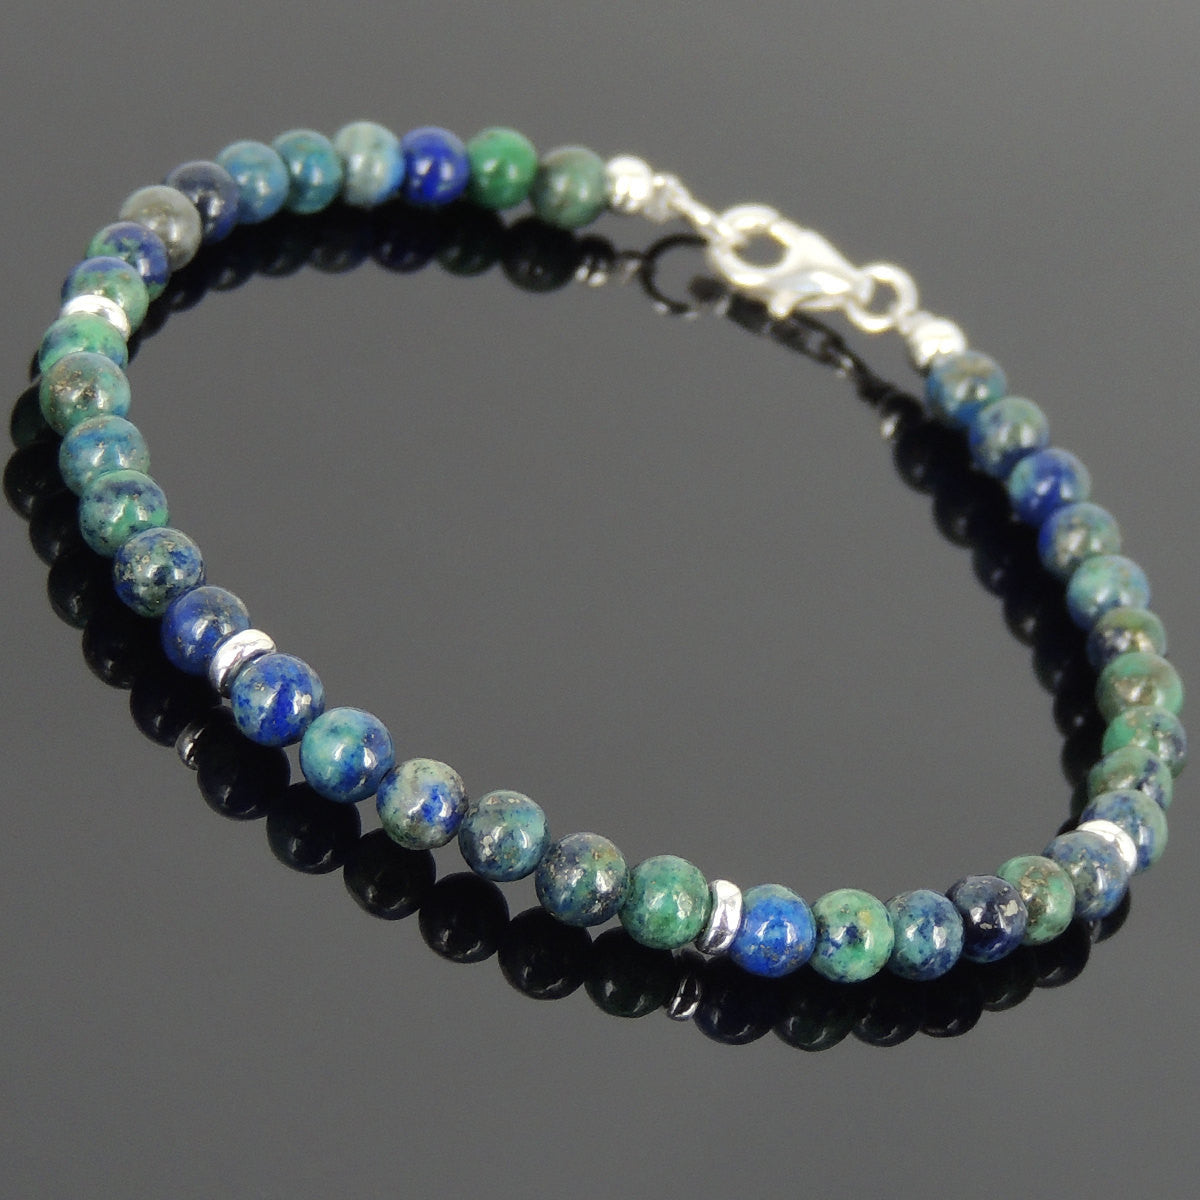 4mm Mixed Chrysocolla Lapis Gemstone Bracelet with S925 Sterling Silver Spacer Beads & Clasp - Handmade by Gem & Silver BR644